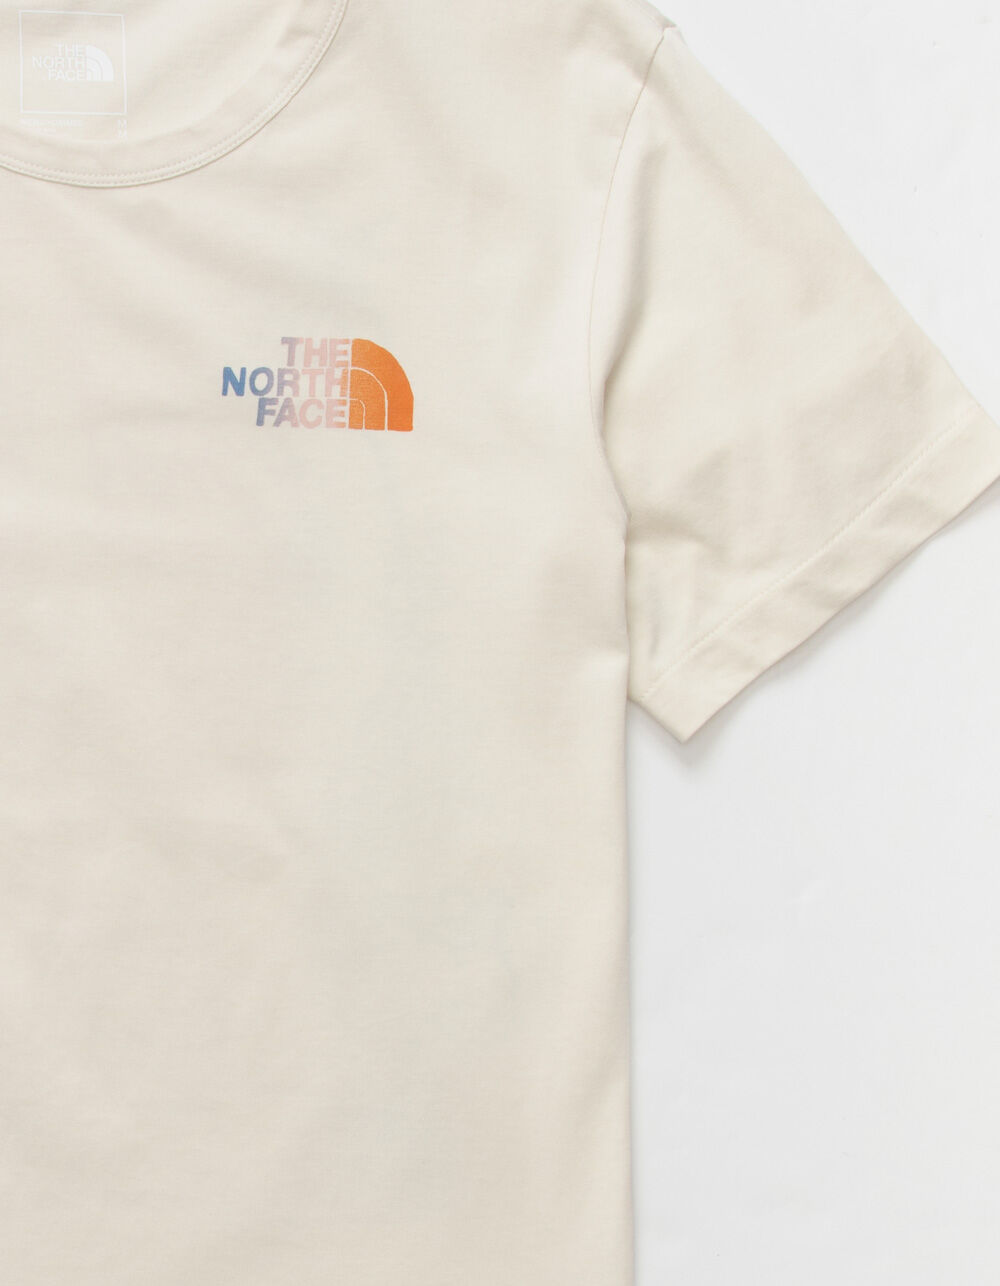 THE NORTH FACE Himalayan Bottle Source Mens T-Shirt - OFF WHITE | Tillys